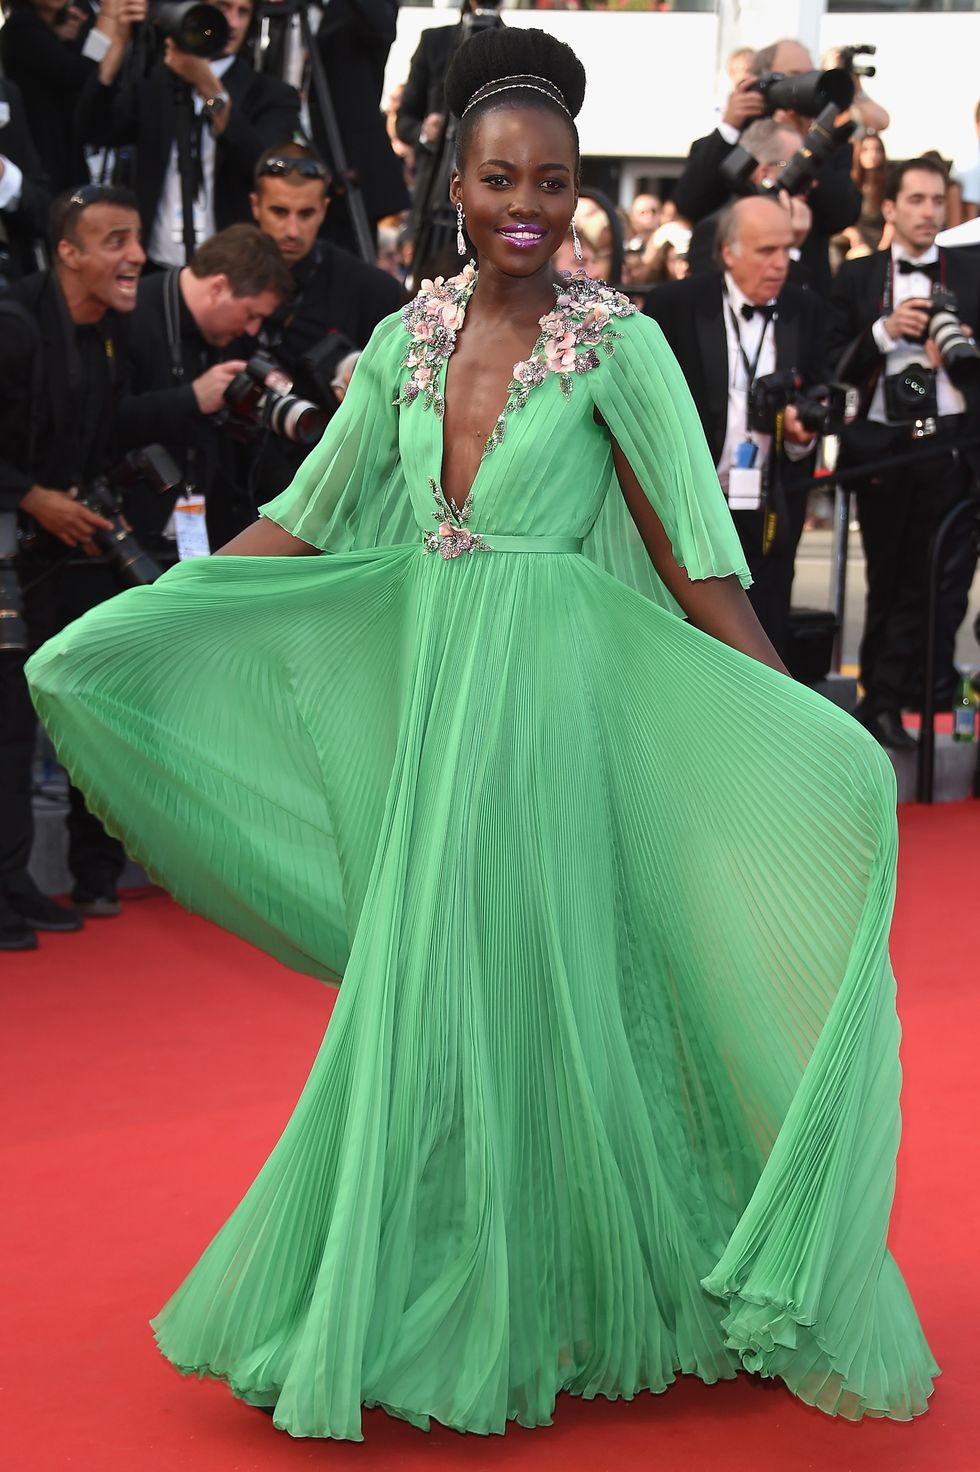 Lupita Nyong'o at the Cannes Film Festival